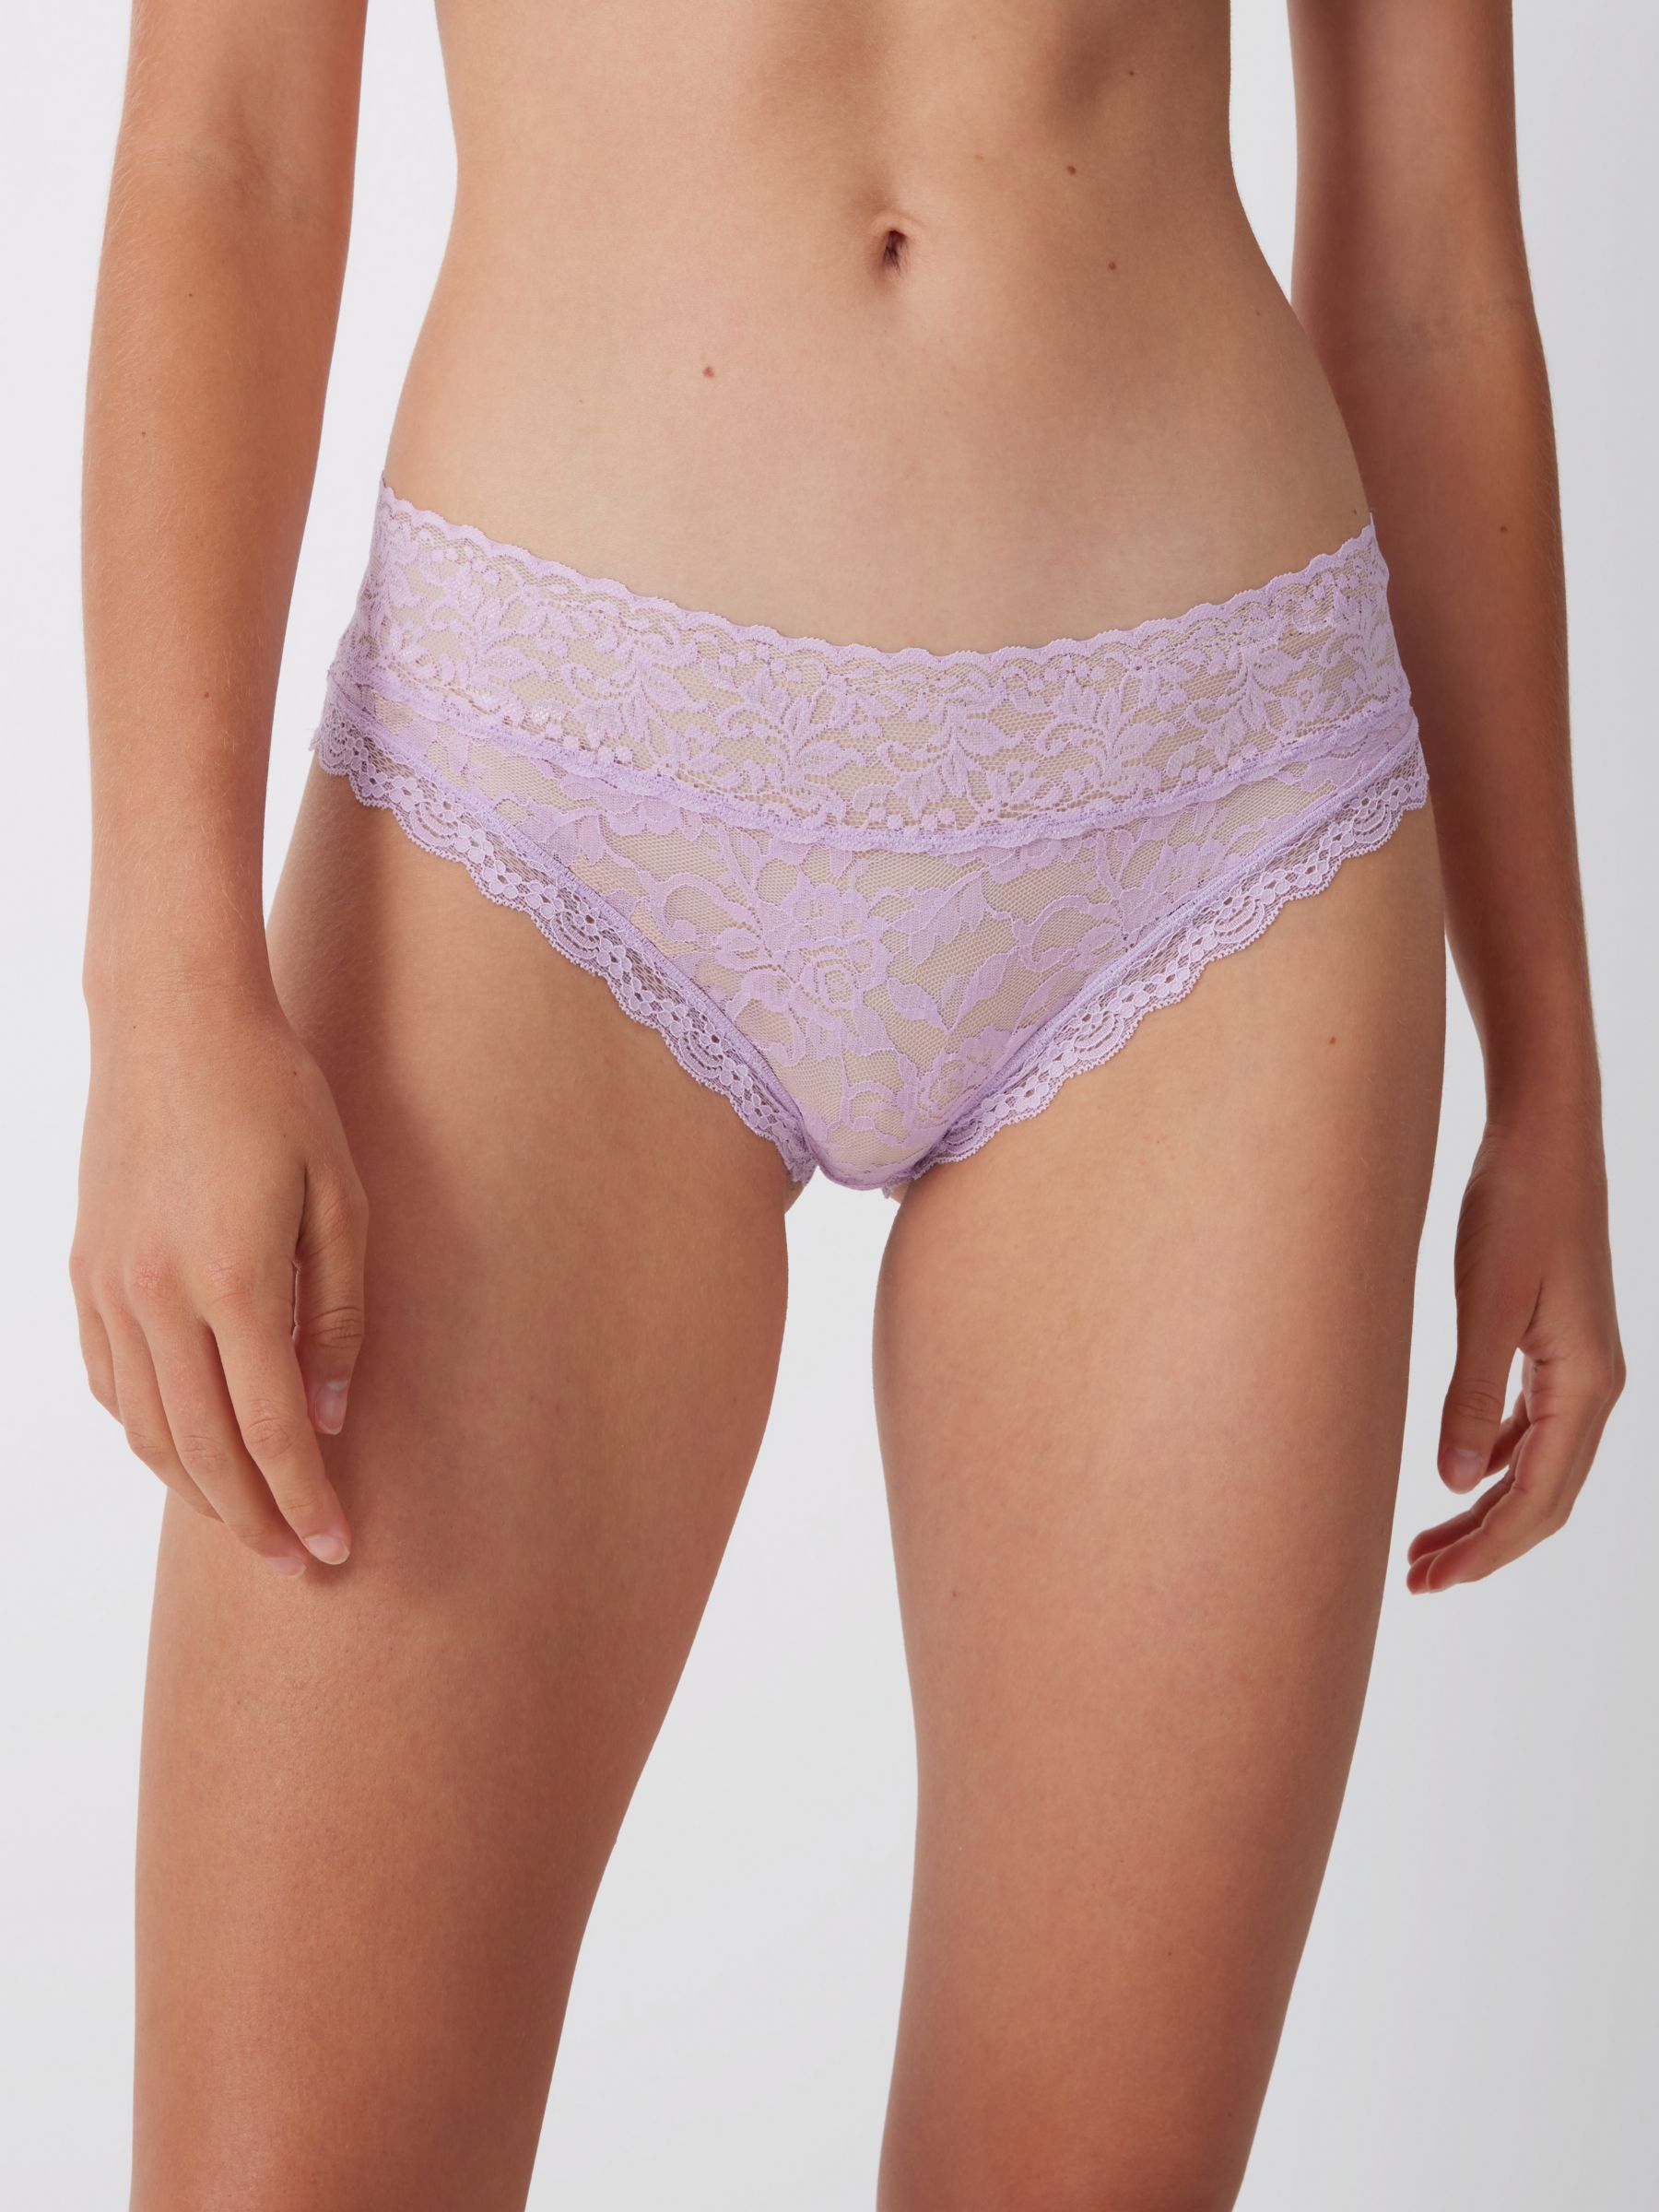 John Lewis ANYDAY Helenca Lace Bikini Knickers, Pack of 3, Teal/Lilac/Navy, 12